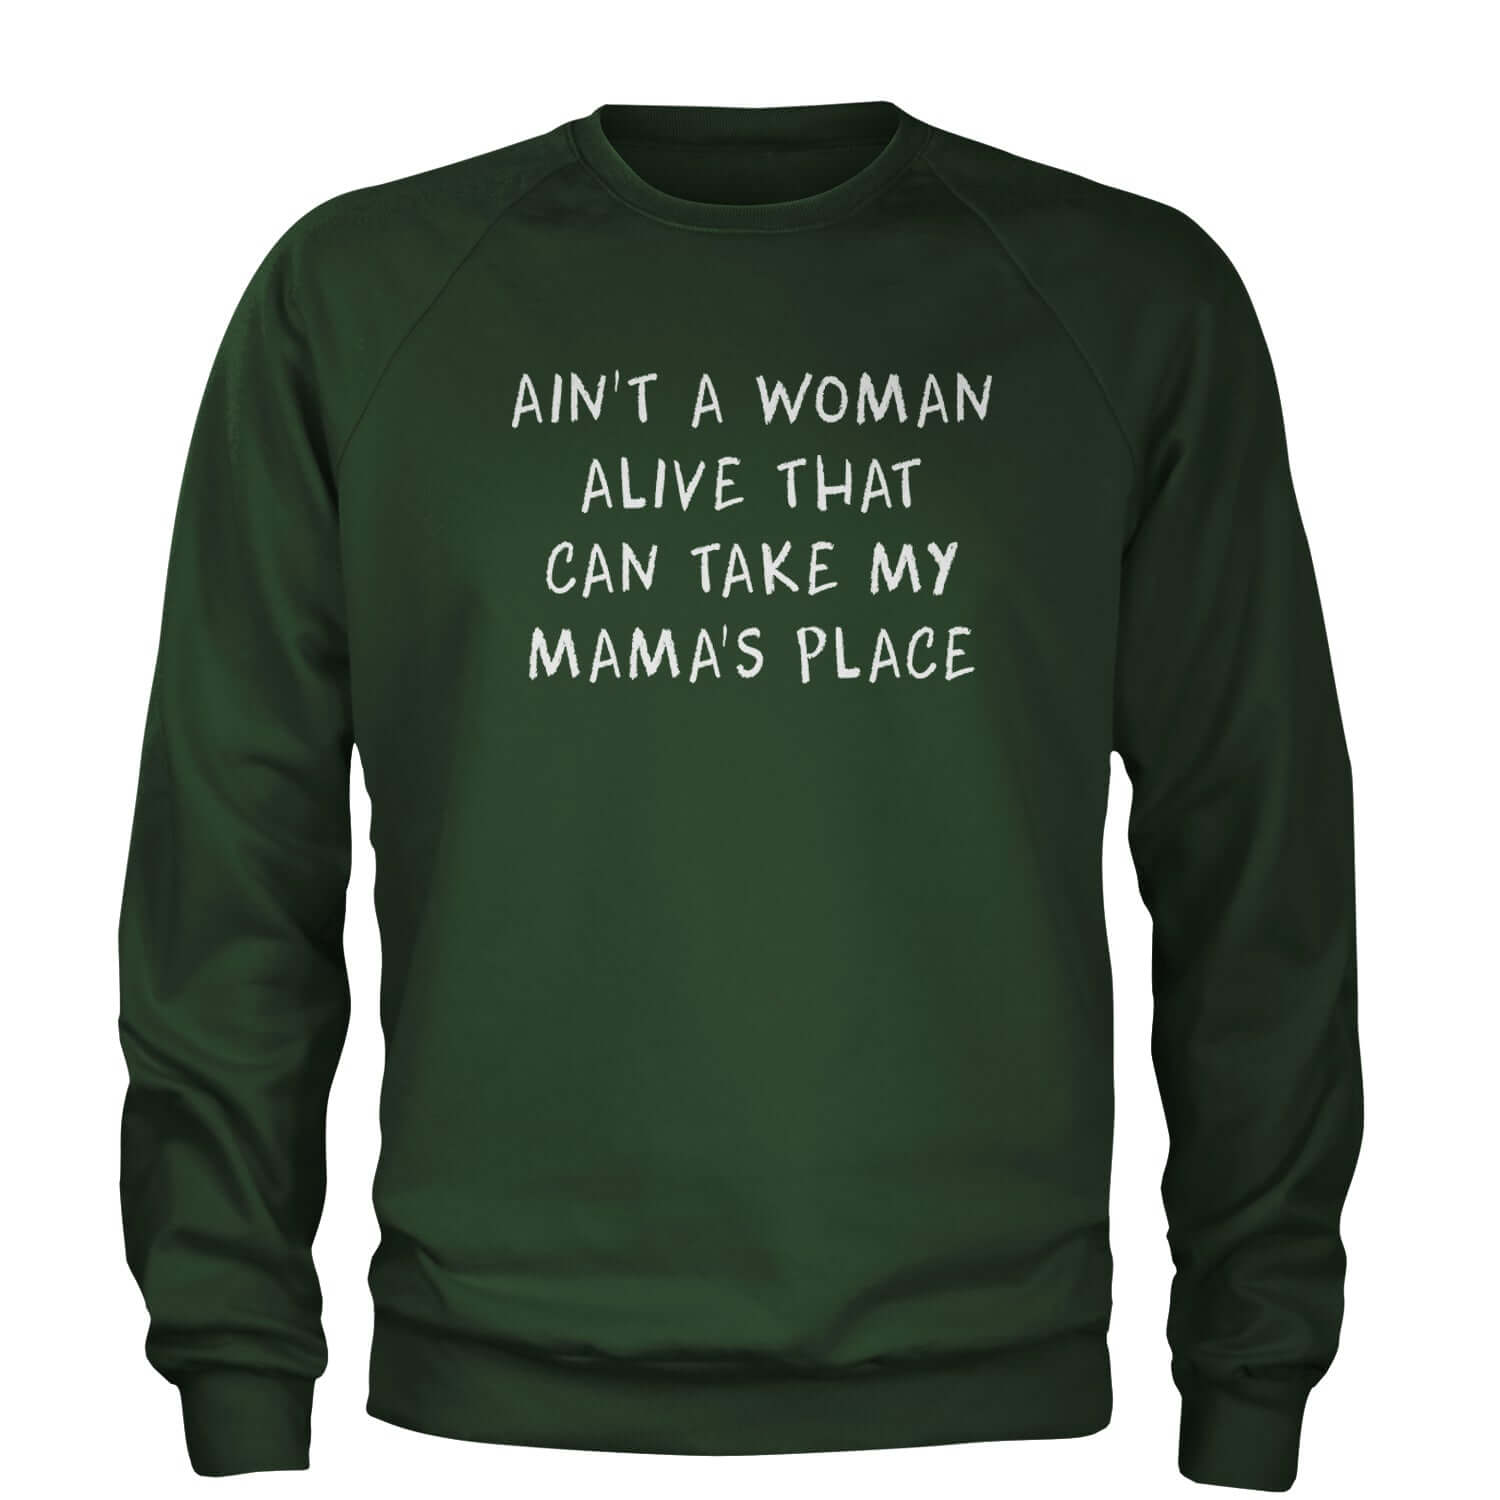 Ain't A Woman Alive That Can Take My Mama's Place Adult Crewneck Sweatshirt 2pac, bear, day, mama, mom, mothers, shakur, tupac by Expression Tees